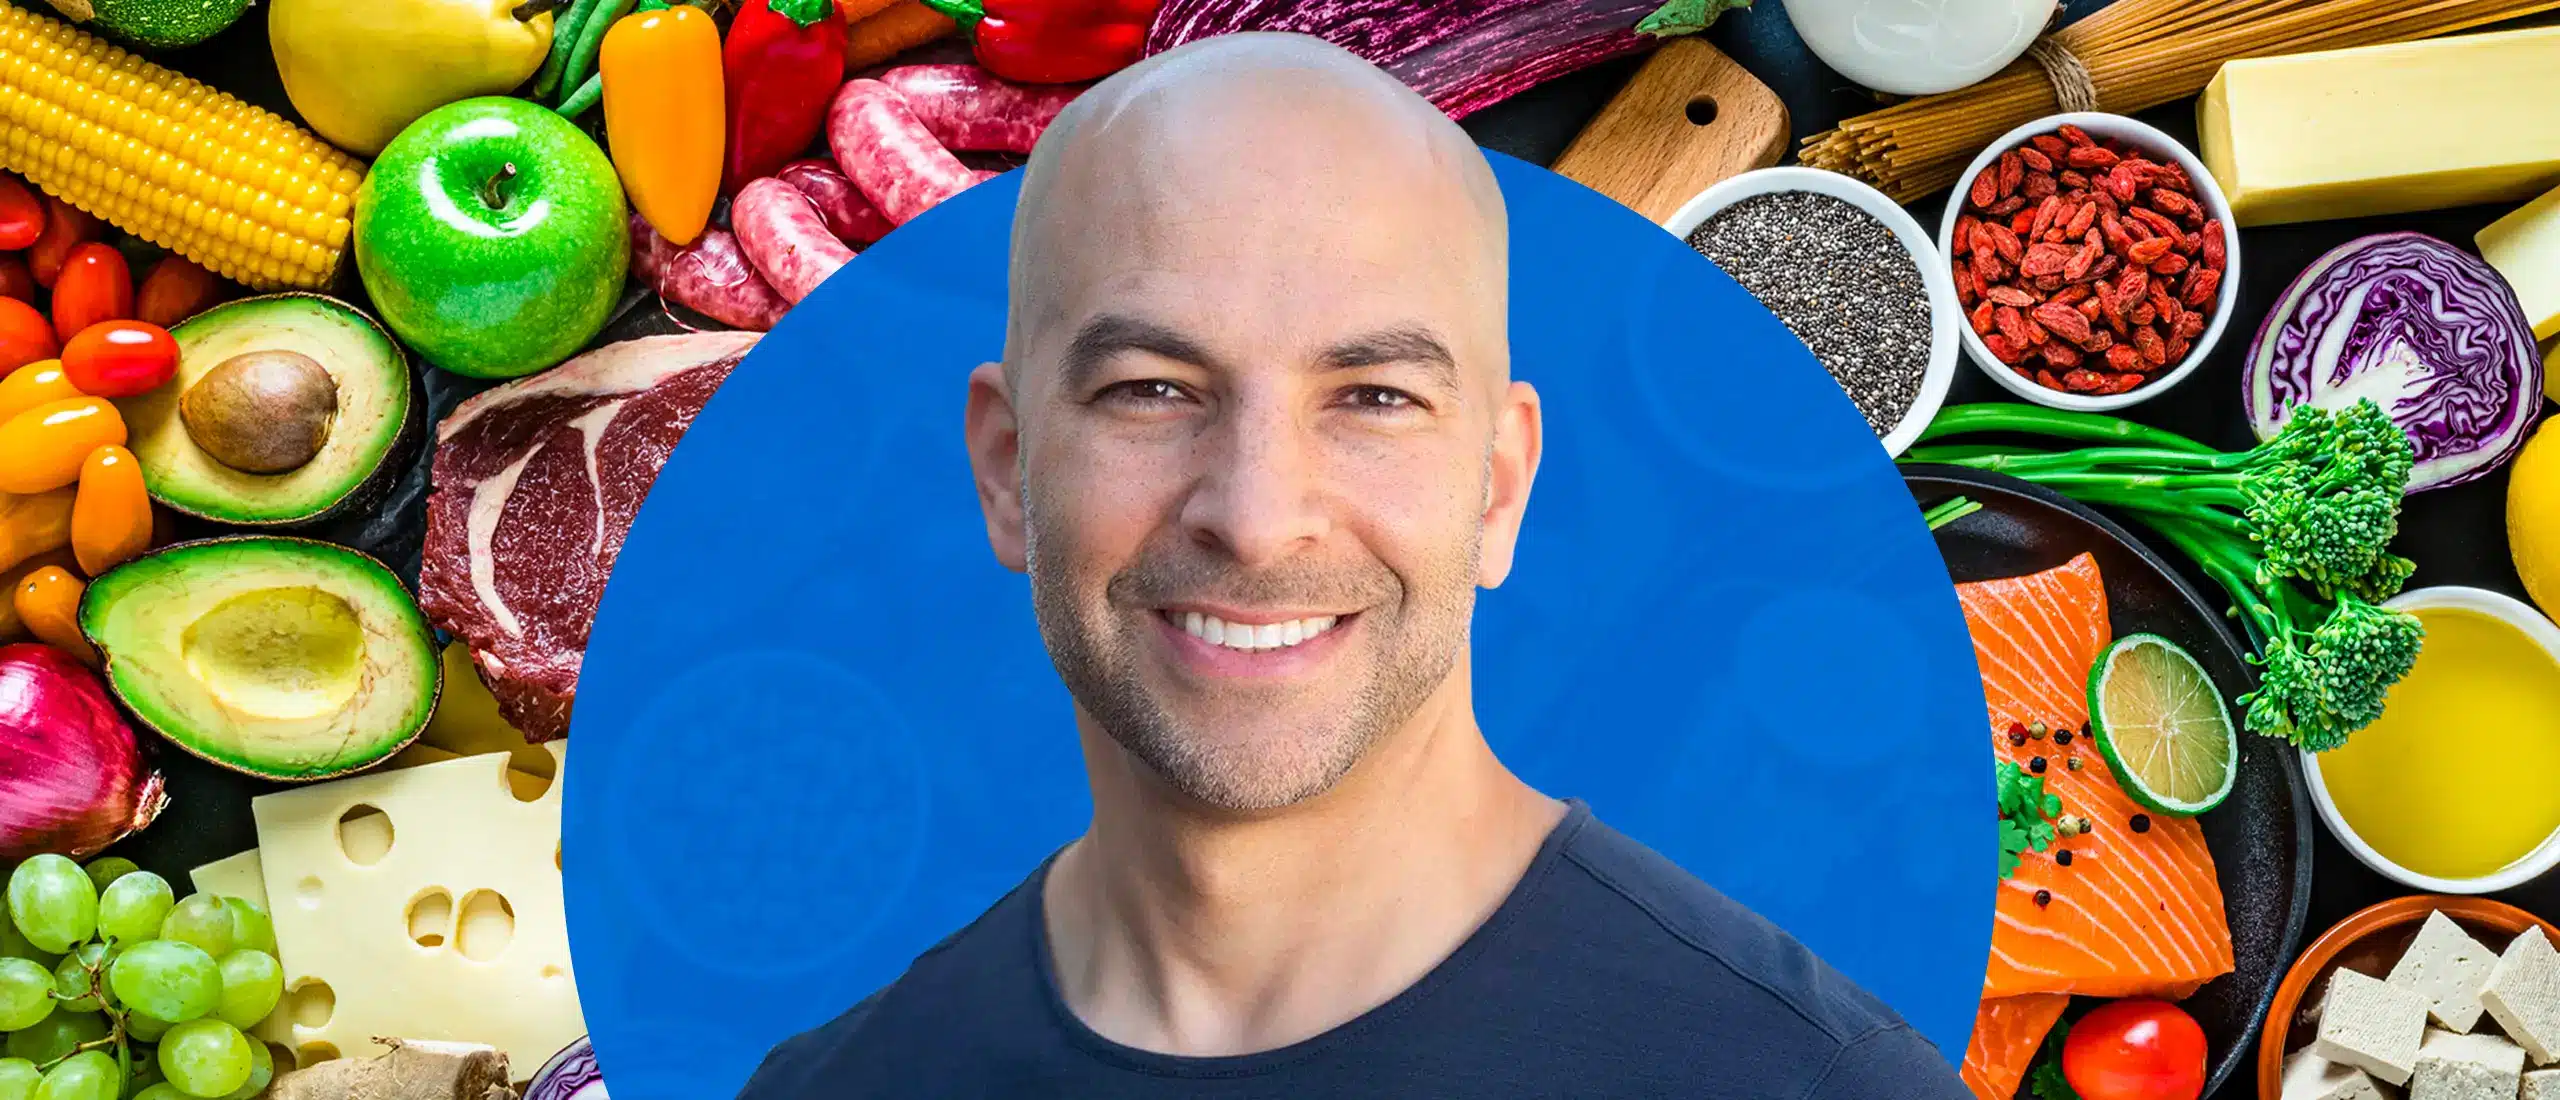 Peter Attia surrounded by food.